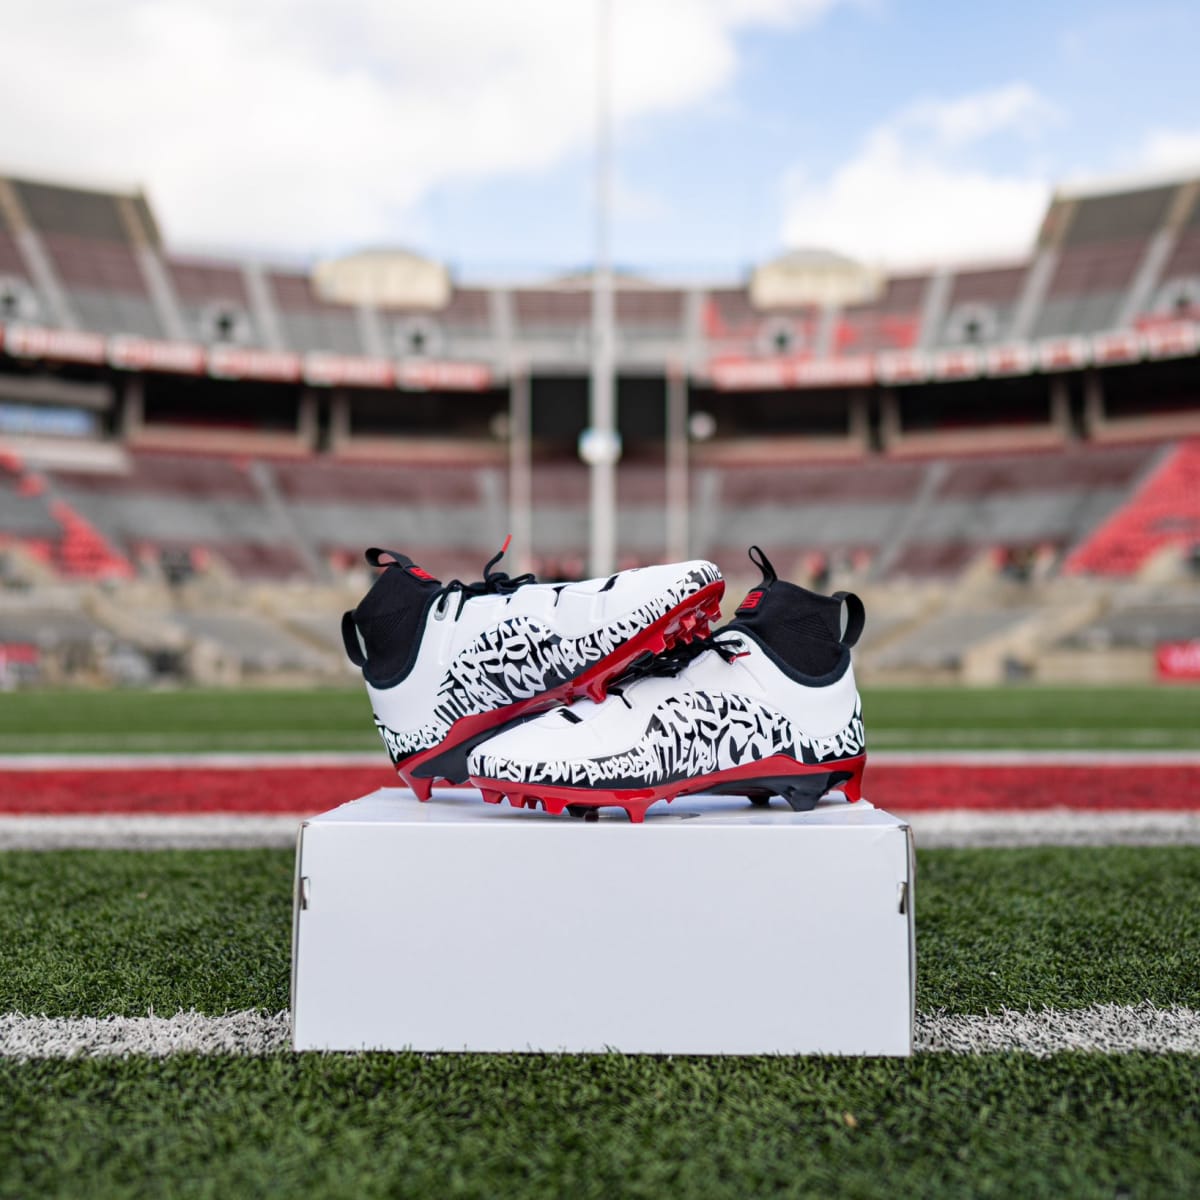 LeBron James & Nike Supply Ohio State with More Cleats - Sports Illustrated  FanNation Kicks News, Analysis and More